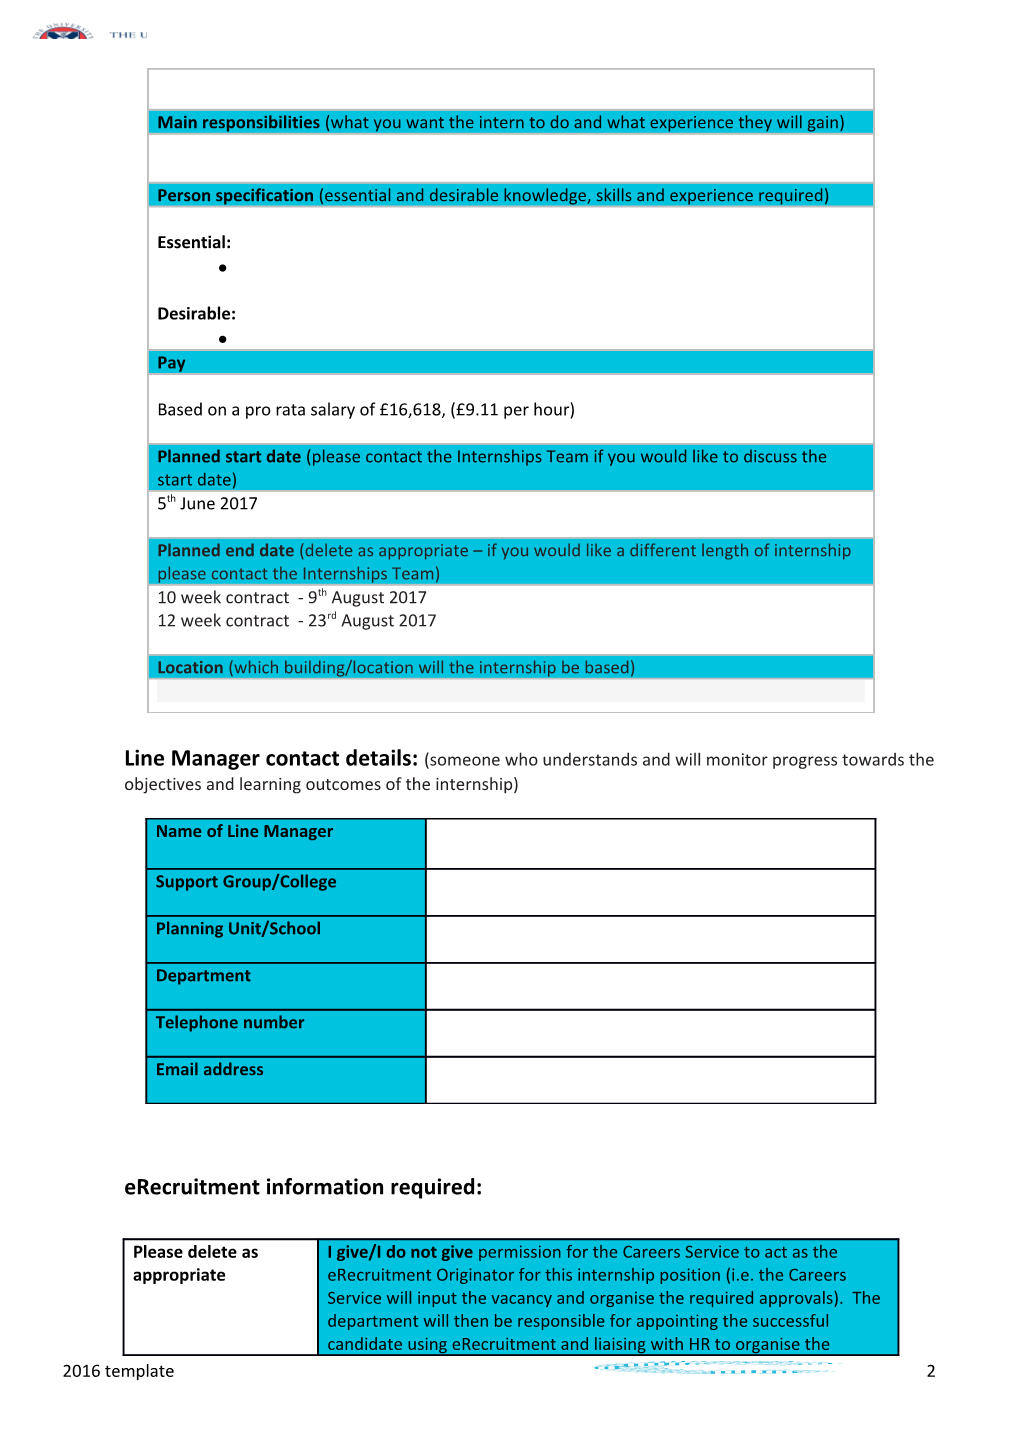 Internship Scoping Template ( Check out Talentscotland for Guidelines)